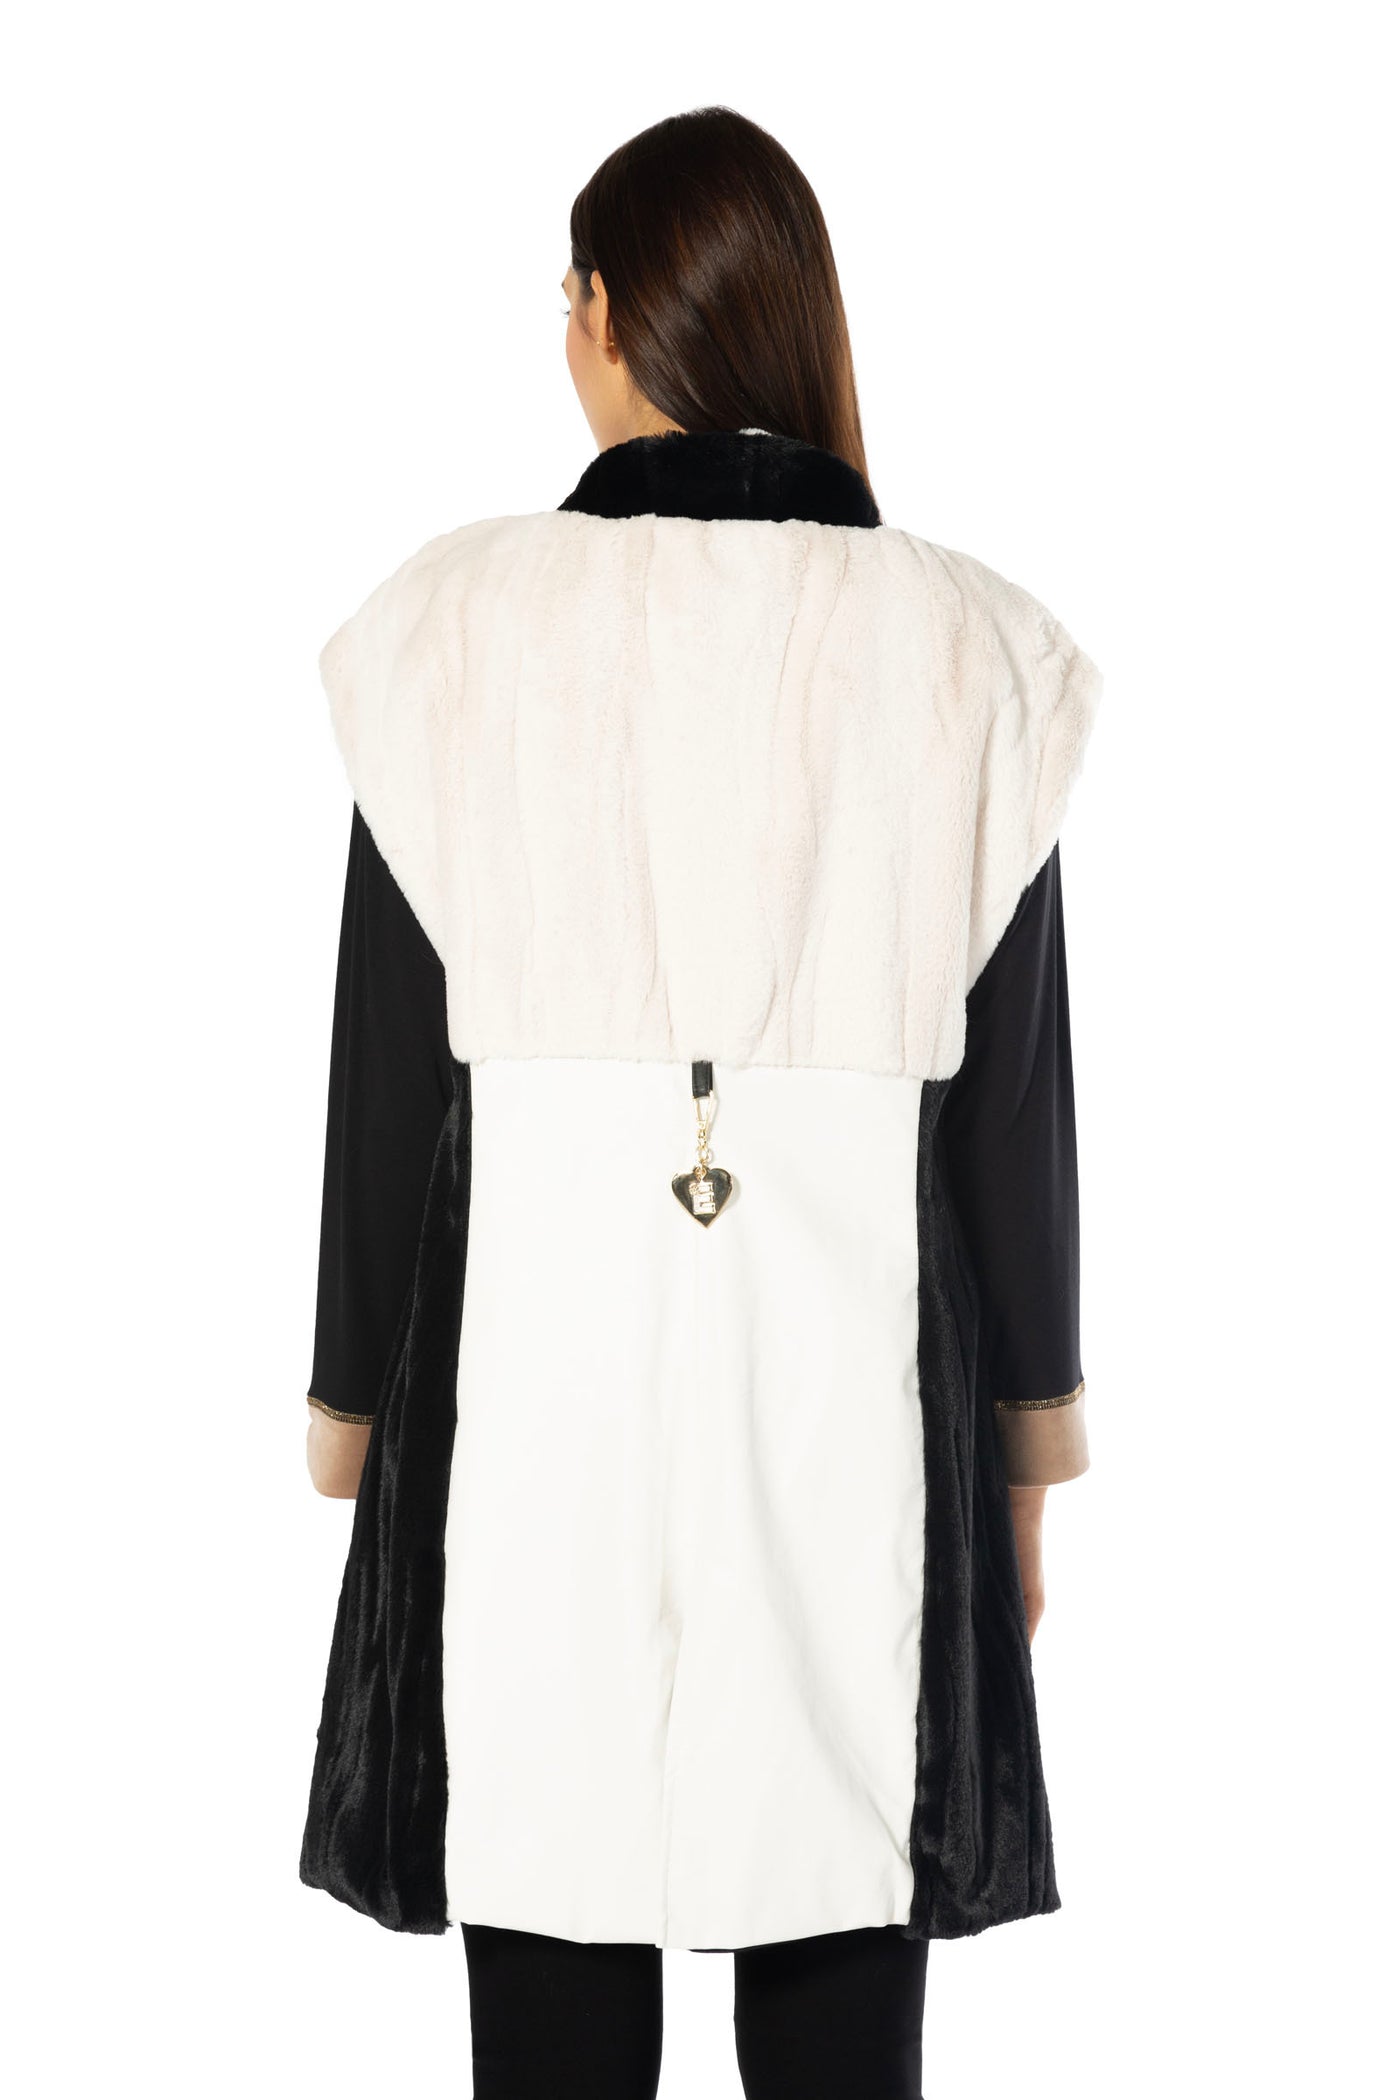 Black and White Faux Fur and Faux Leather Long Sleeveless Jacket